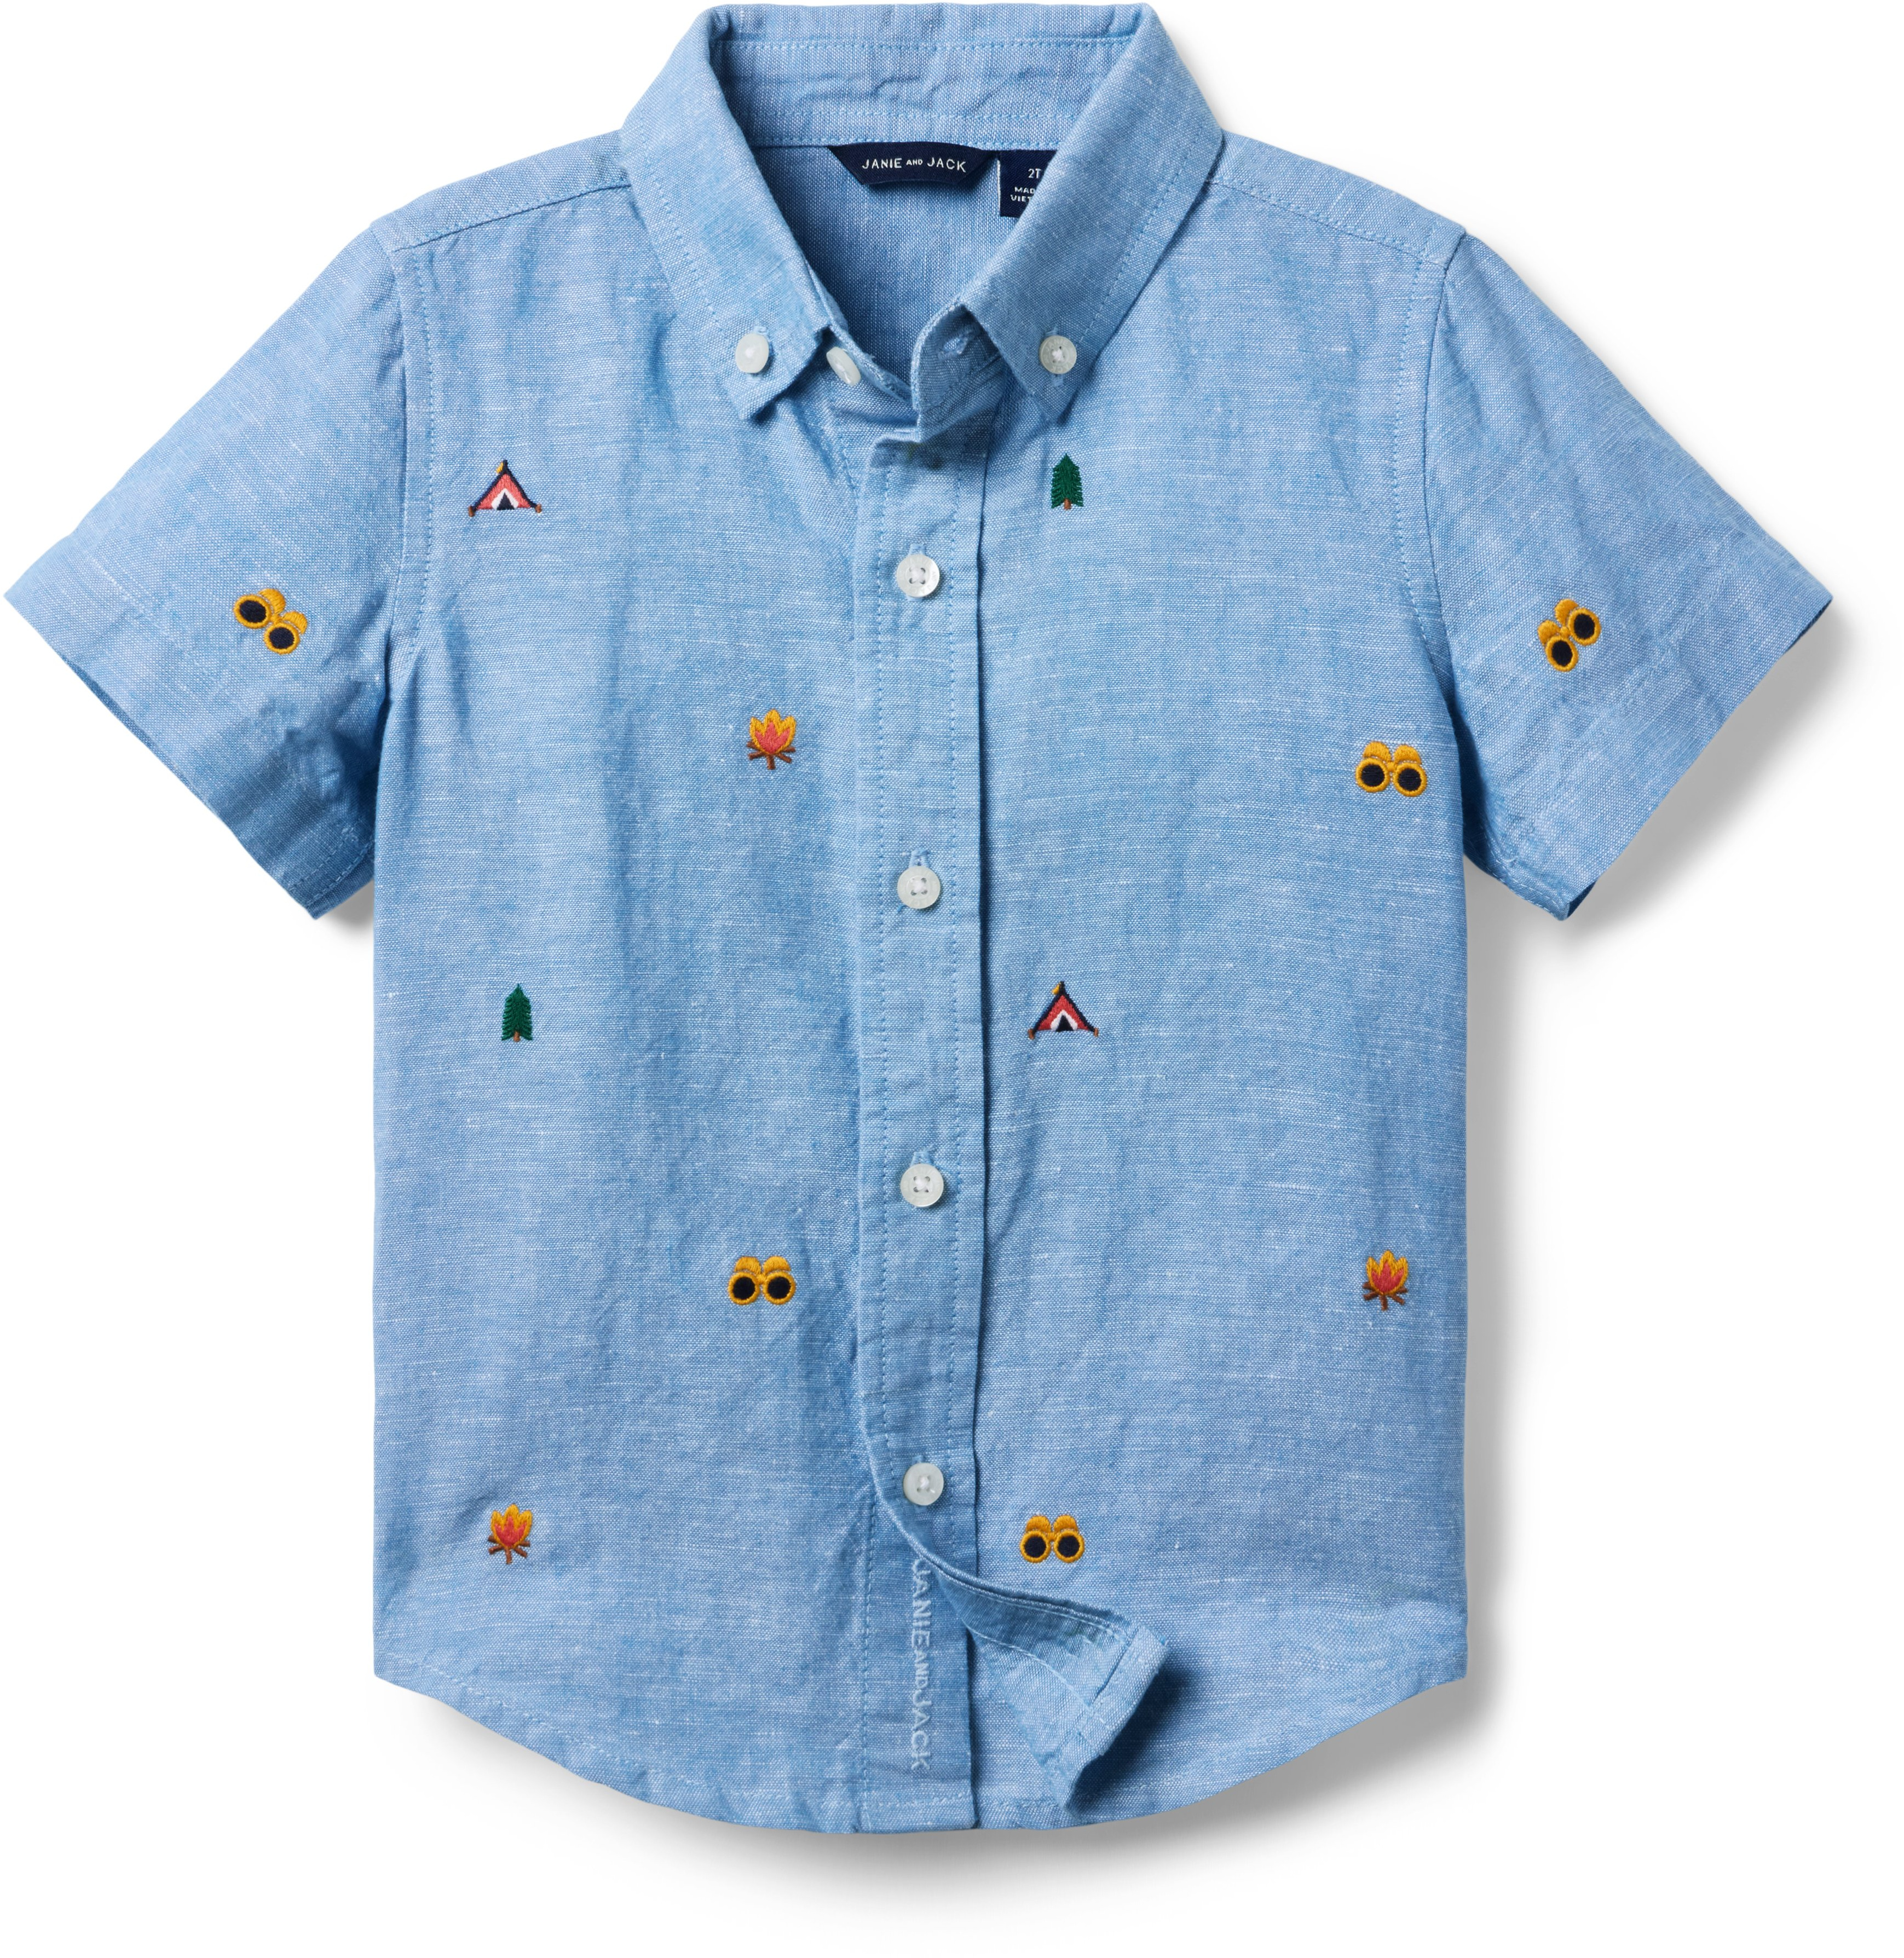 Boys Embroidered Linen Top (Toddler/Little Kid/Big Kid) Janie and Jack